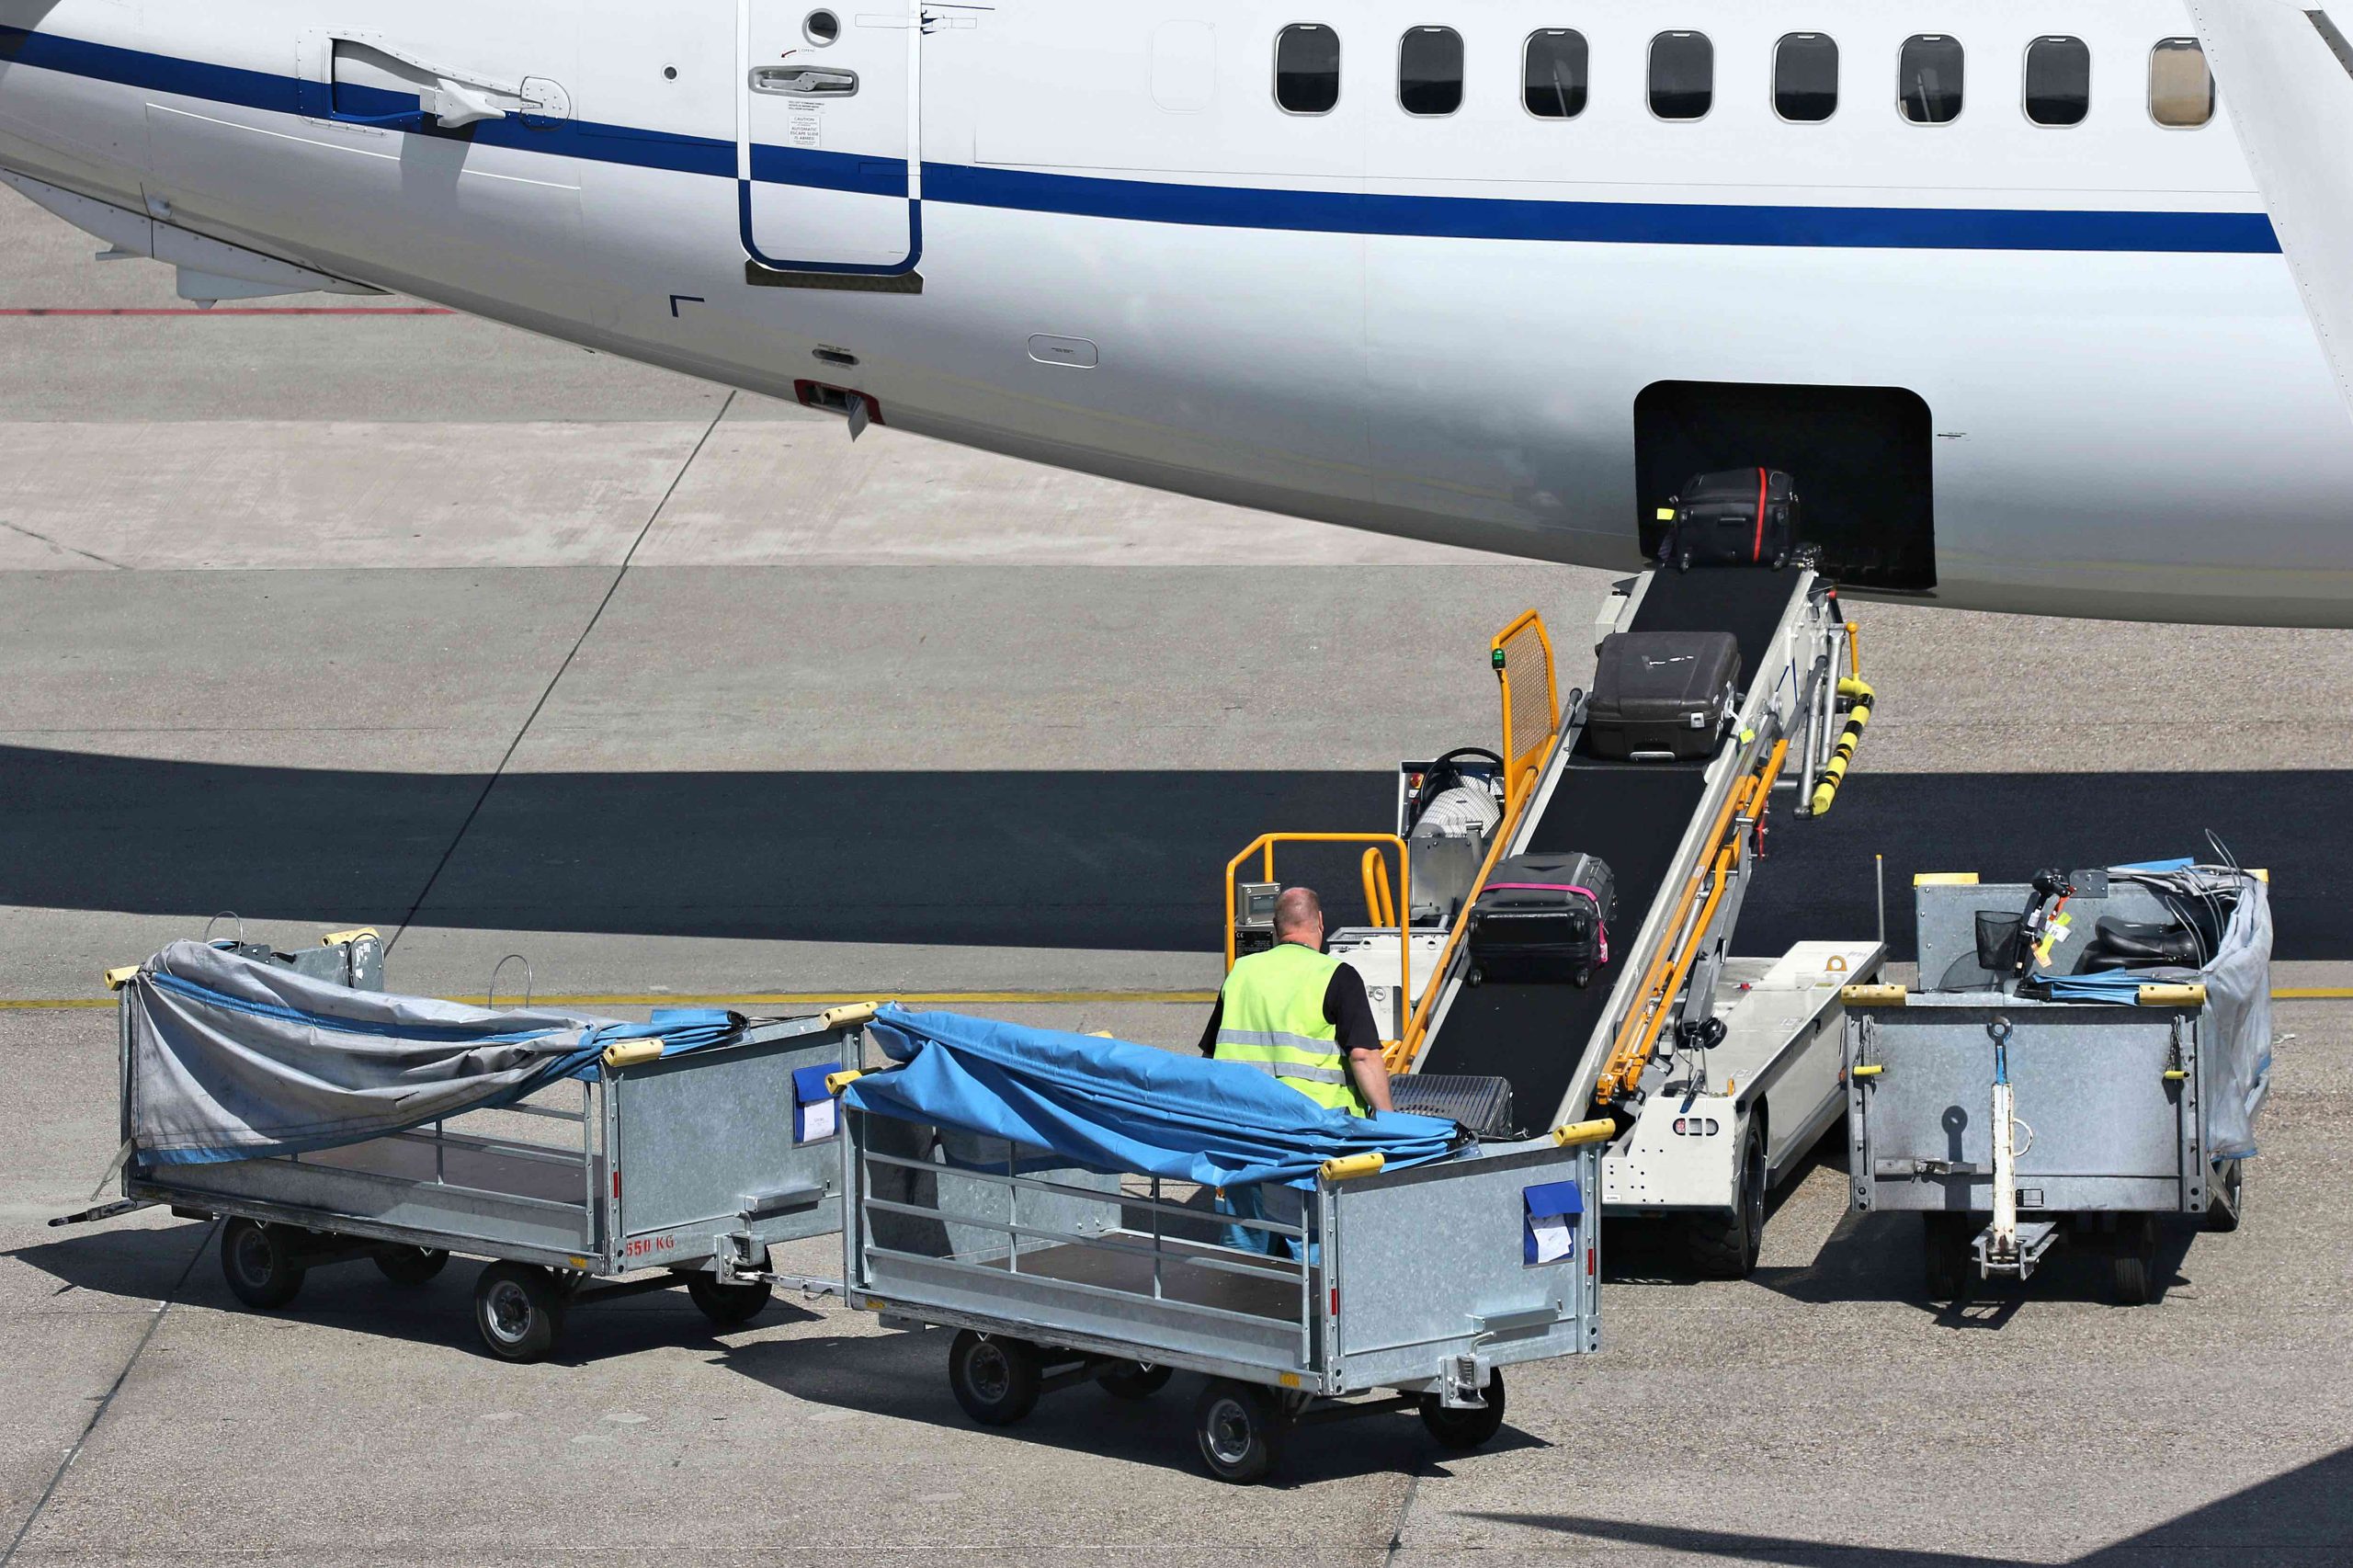 man watches as suitcases move up conveyor belt into the body of airplane